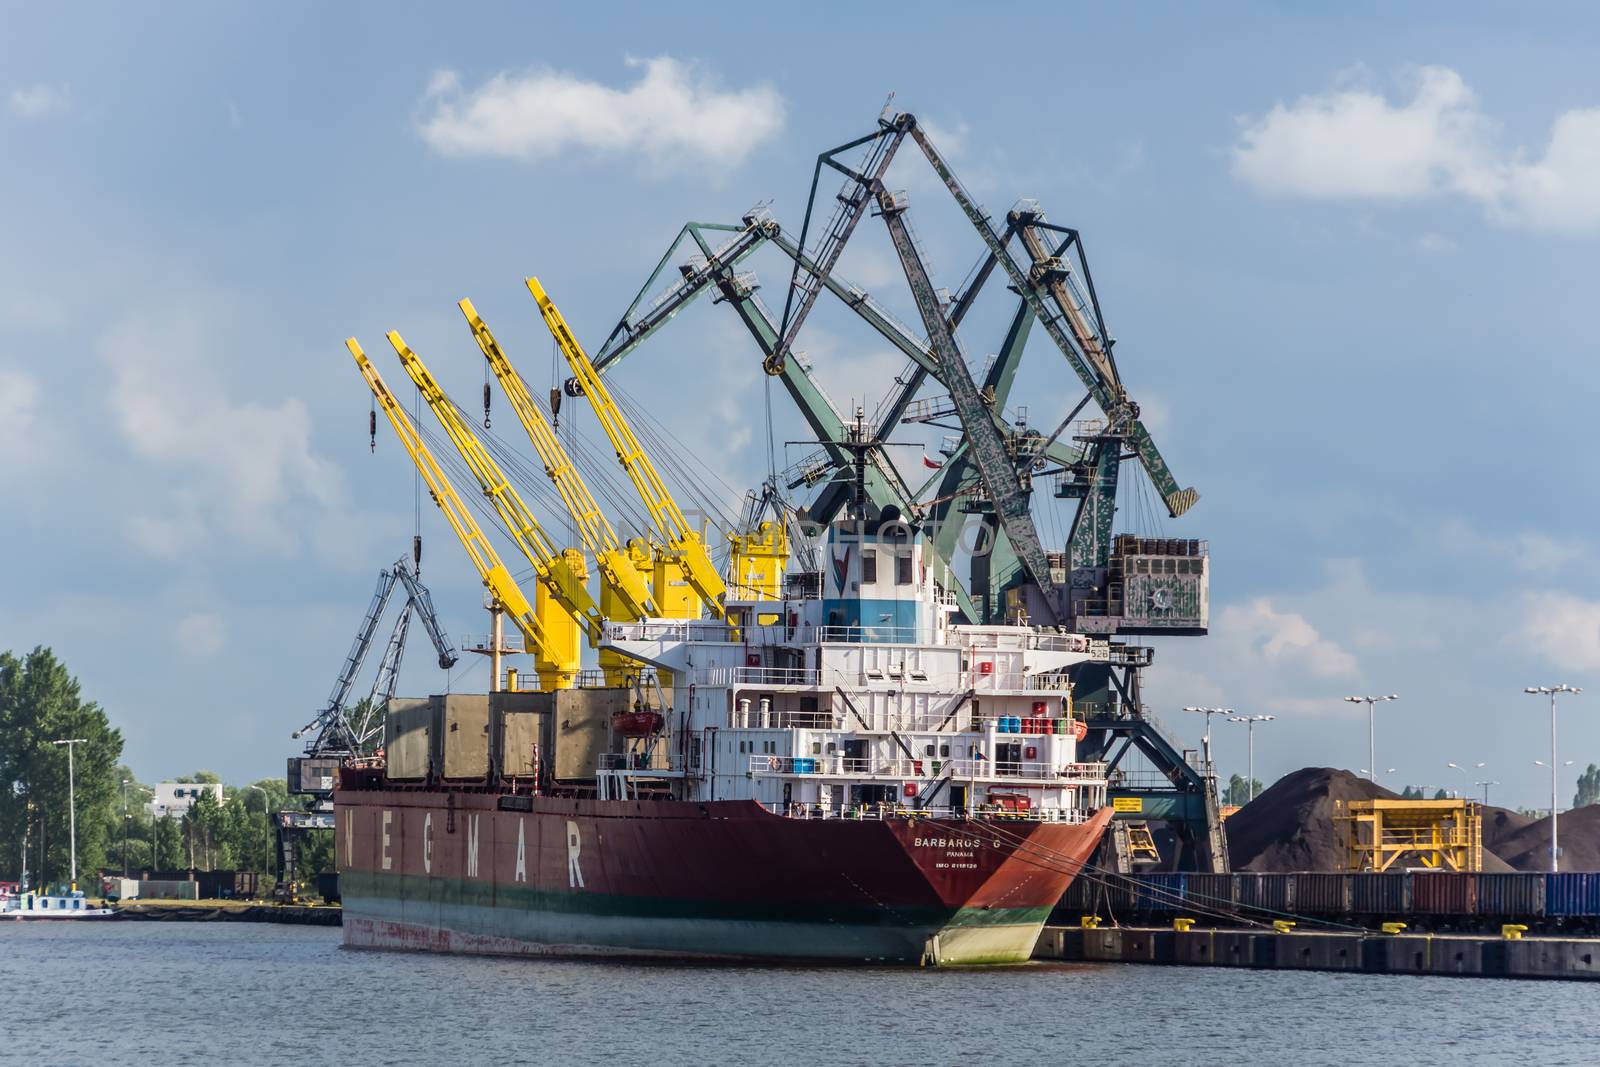 The ship on the quay on July 11, 2013, in the Port of Gdansk - the largest seaport in Poland, a major transportation hub in the central part of the southern Baltic Sea coast.